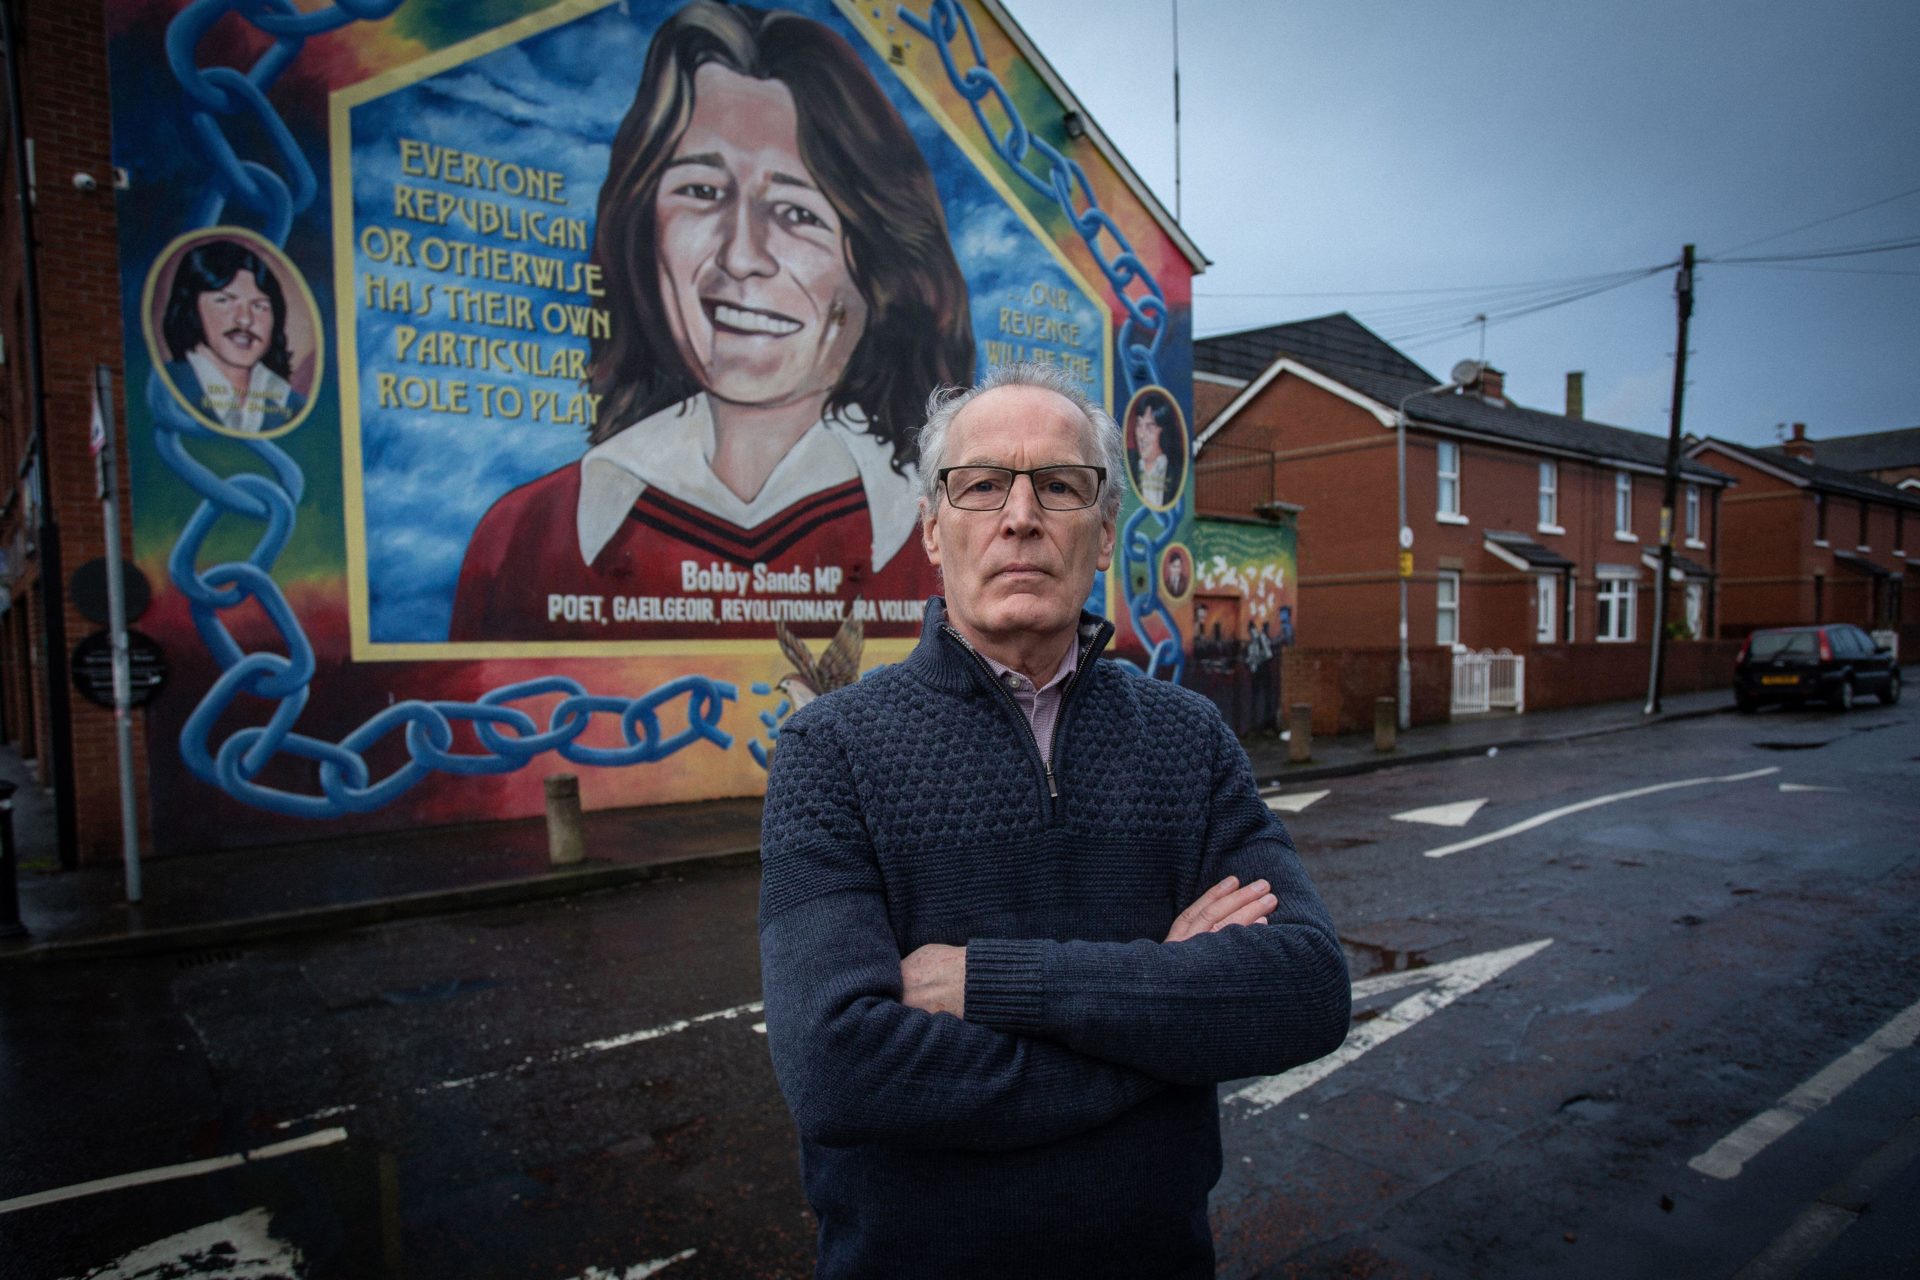 Gerry Kelly stands in front of the Bobby Sands mural in Belfast, Northern Ireland in February 2021